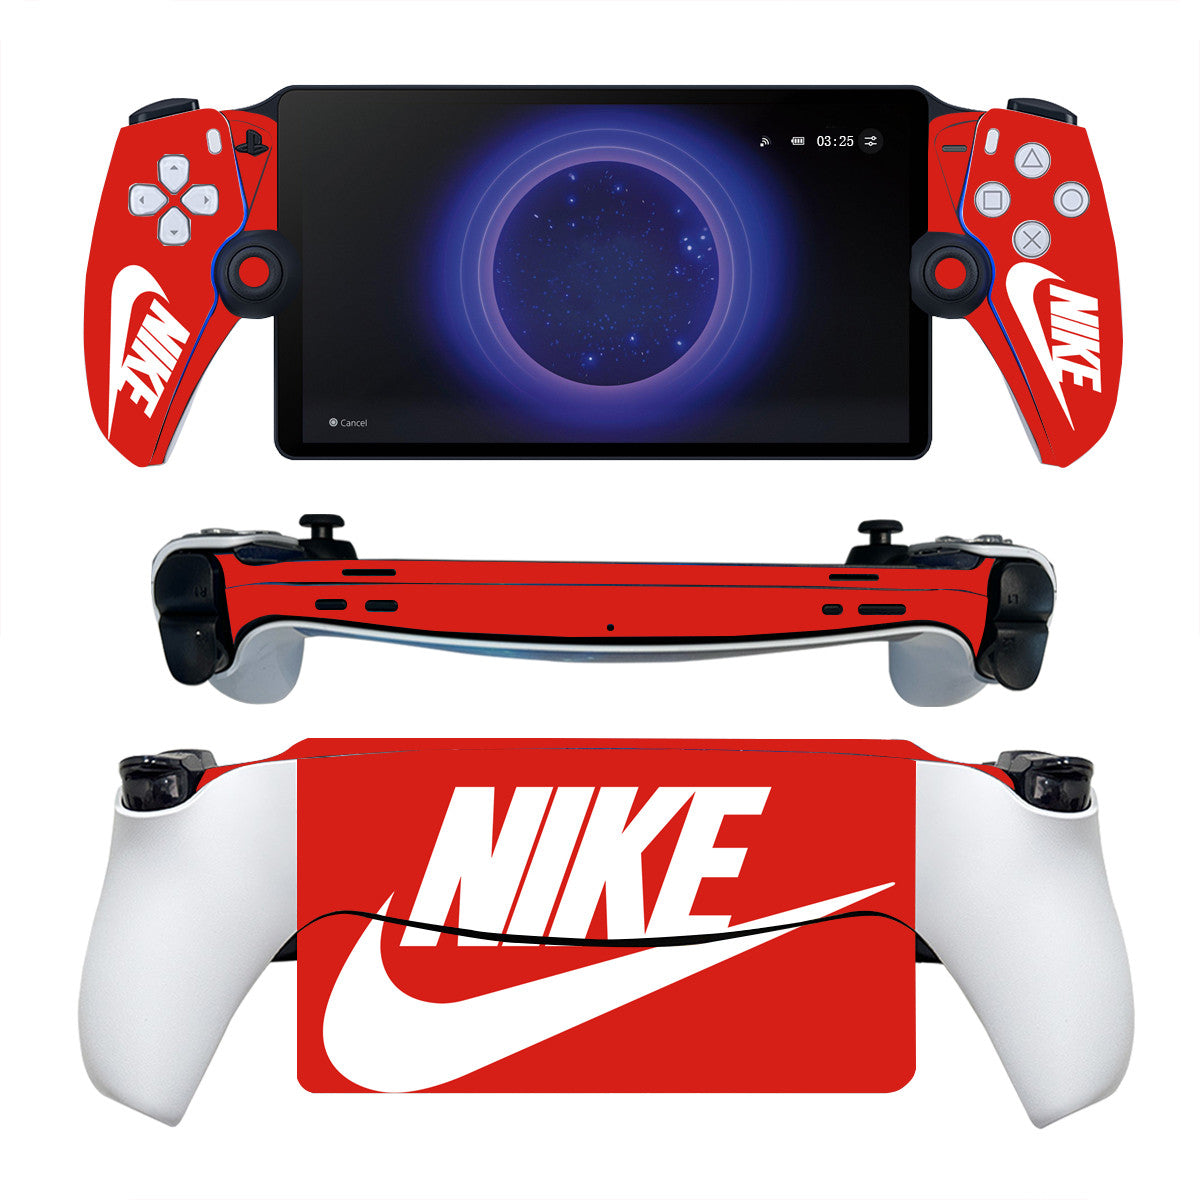 Exclusive collaboration: Nike and PlayStation unite in the Portal Protector Skin for a unique console experience.